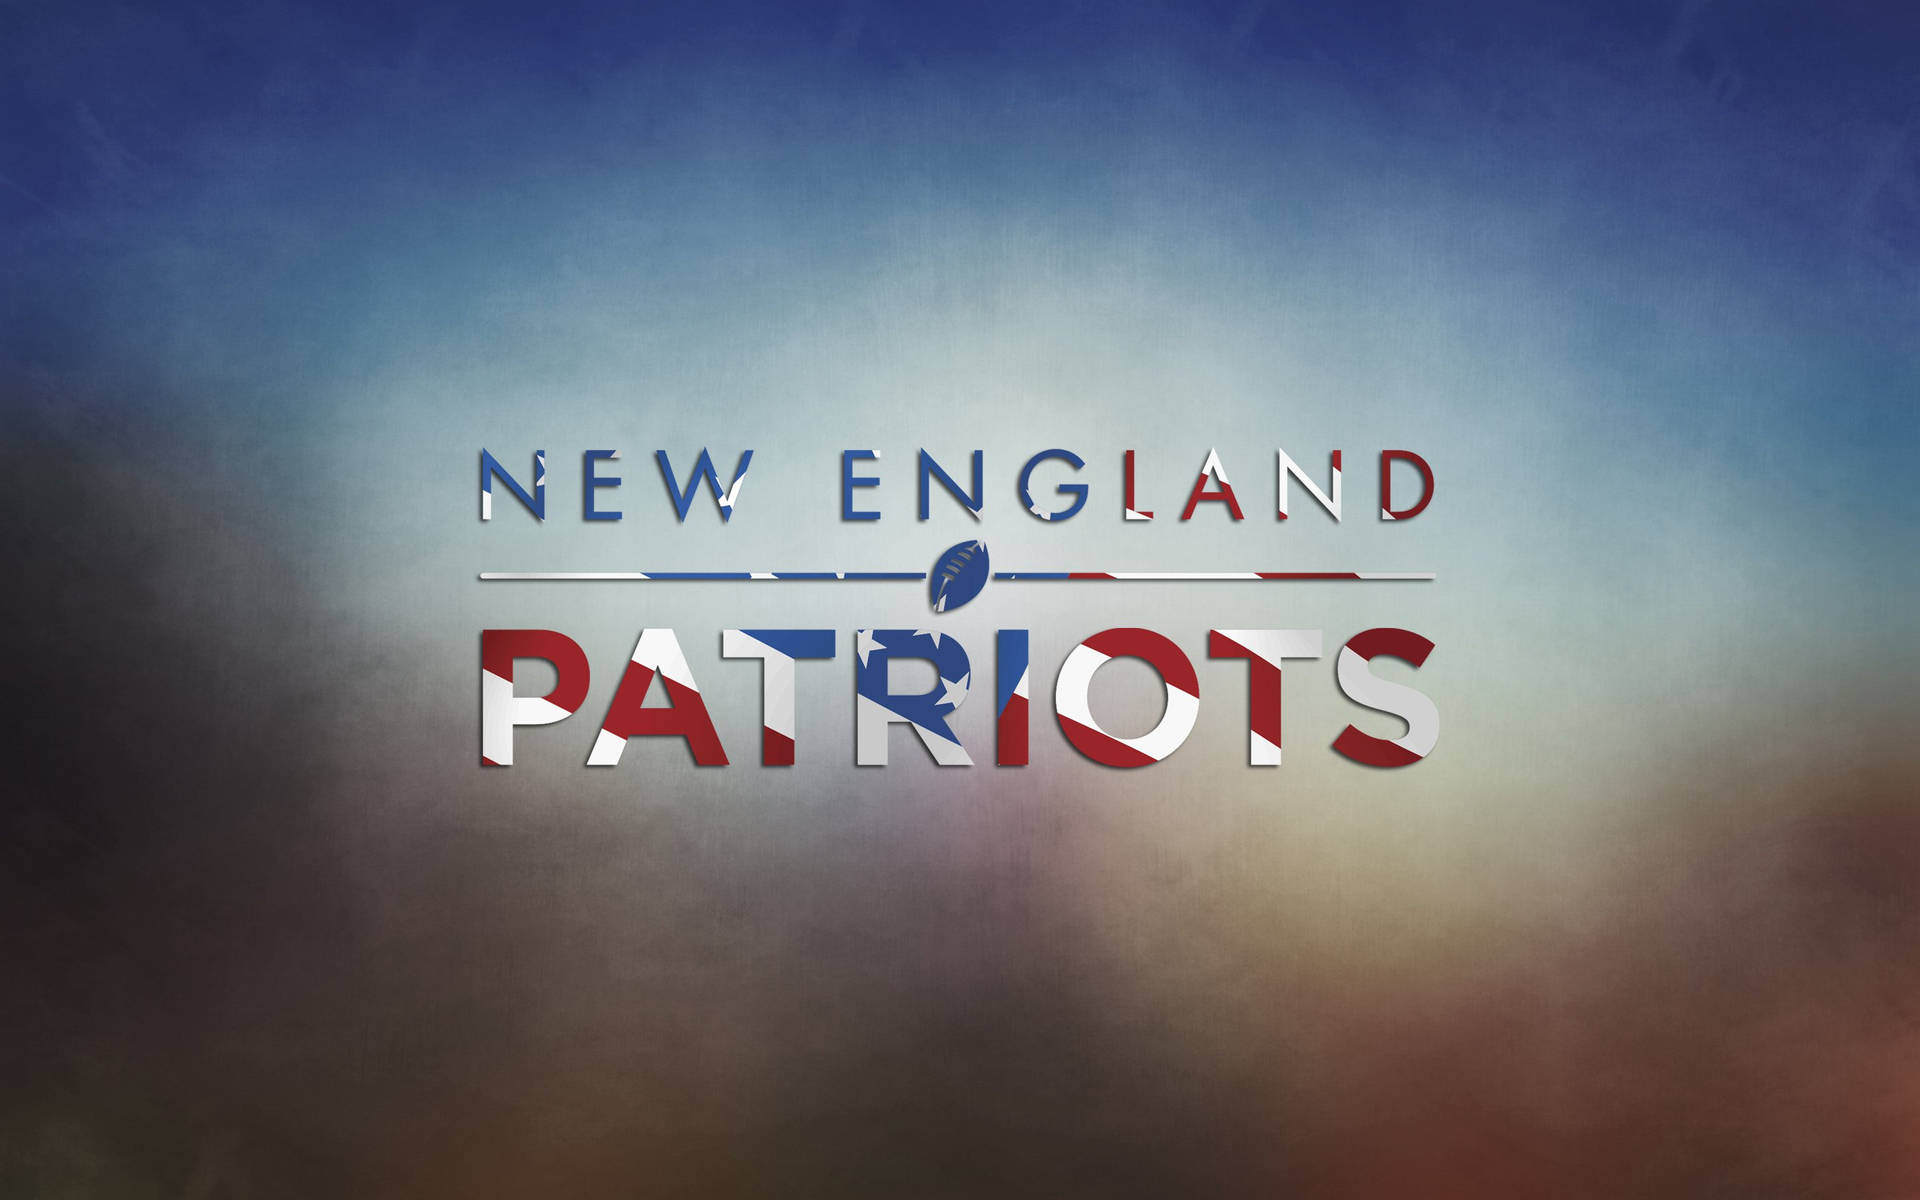 Rise Up. Show your support for the awesome Patriots! Wallpaper